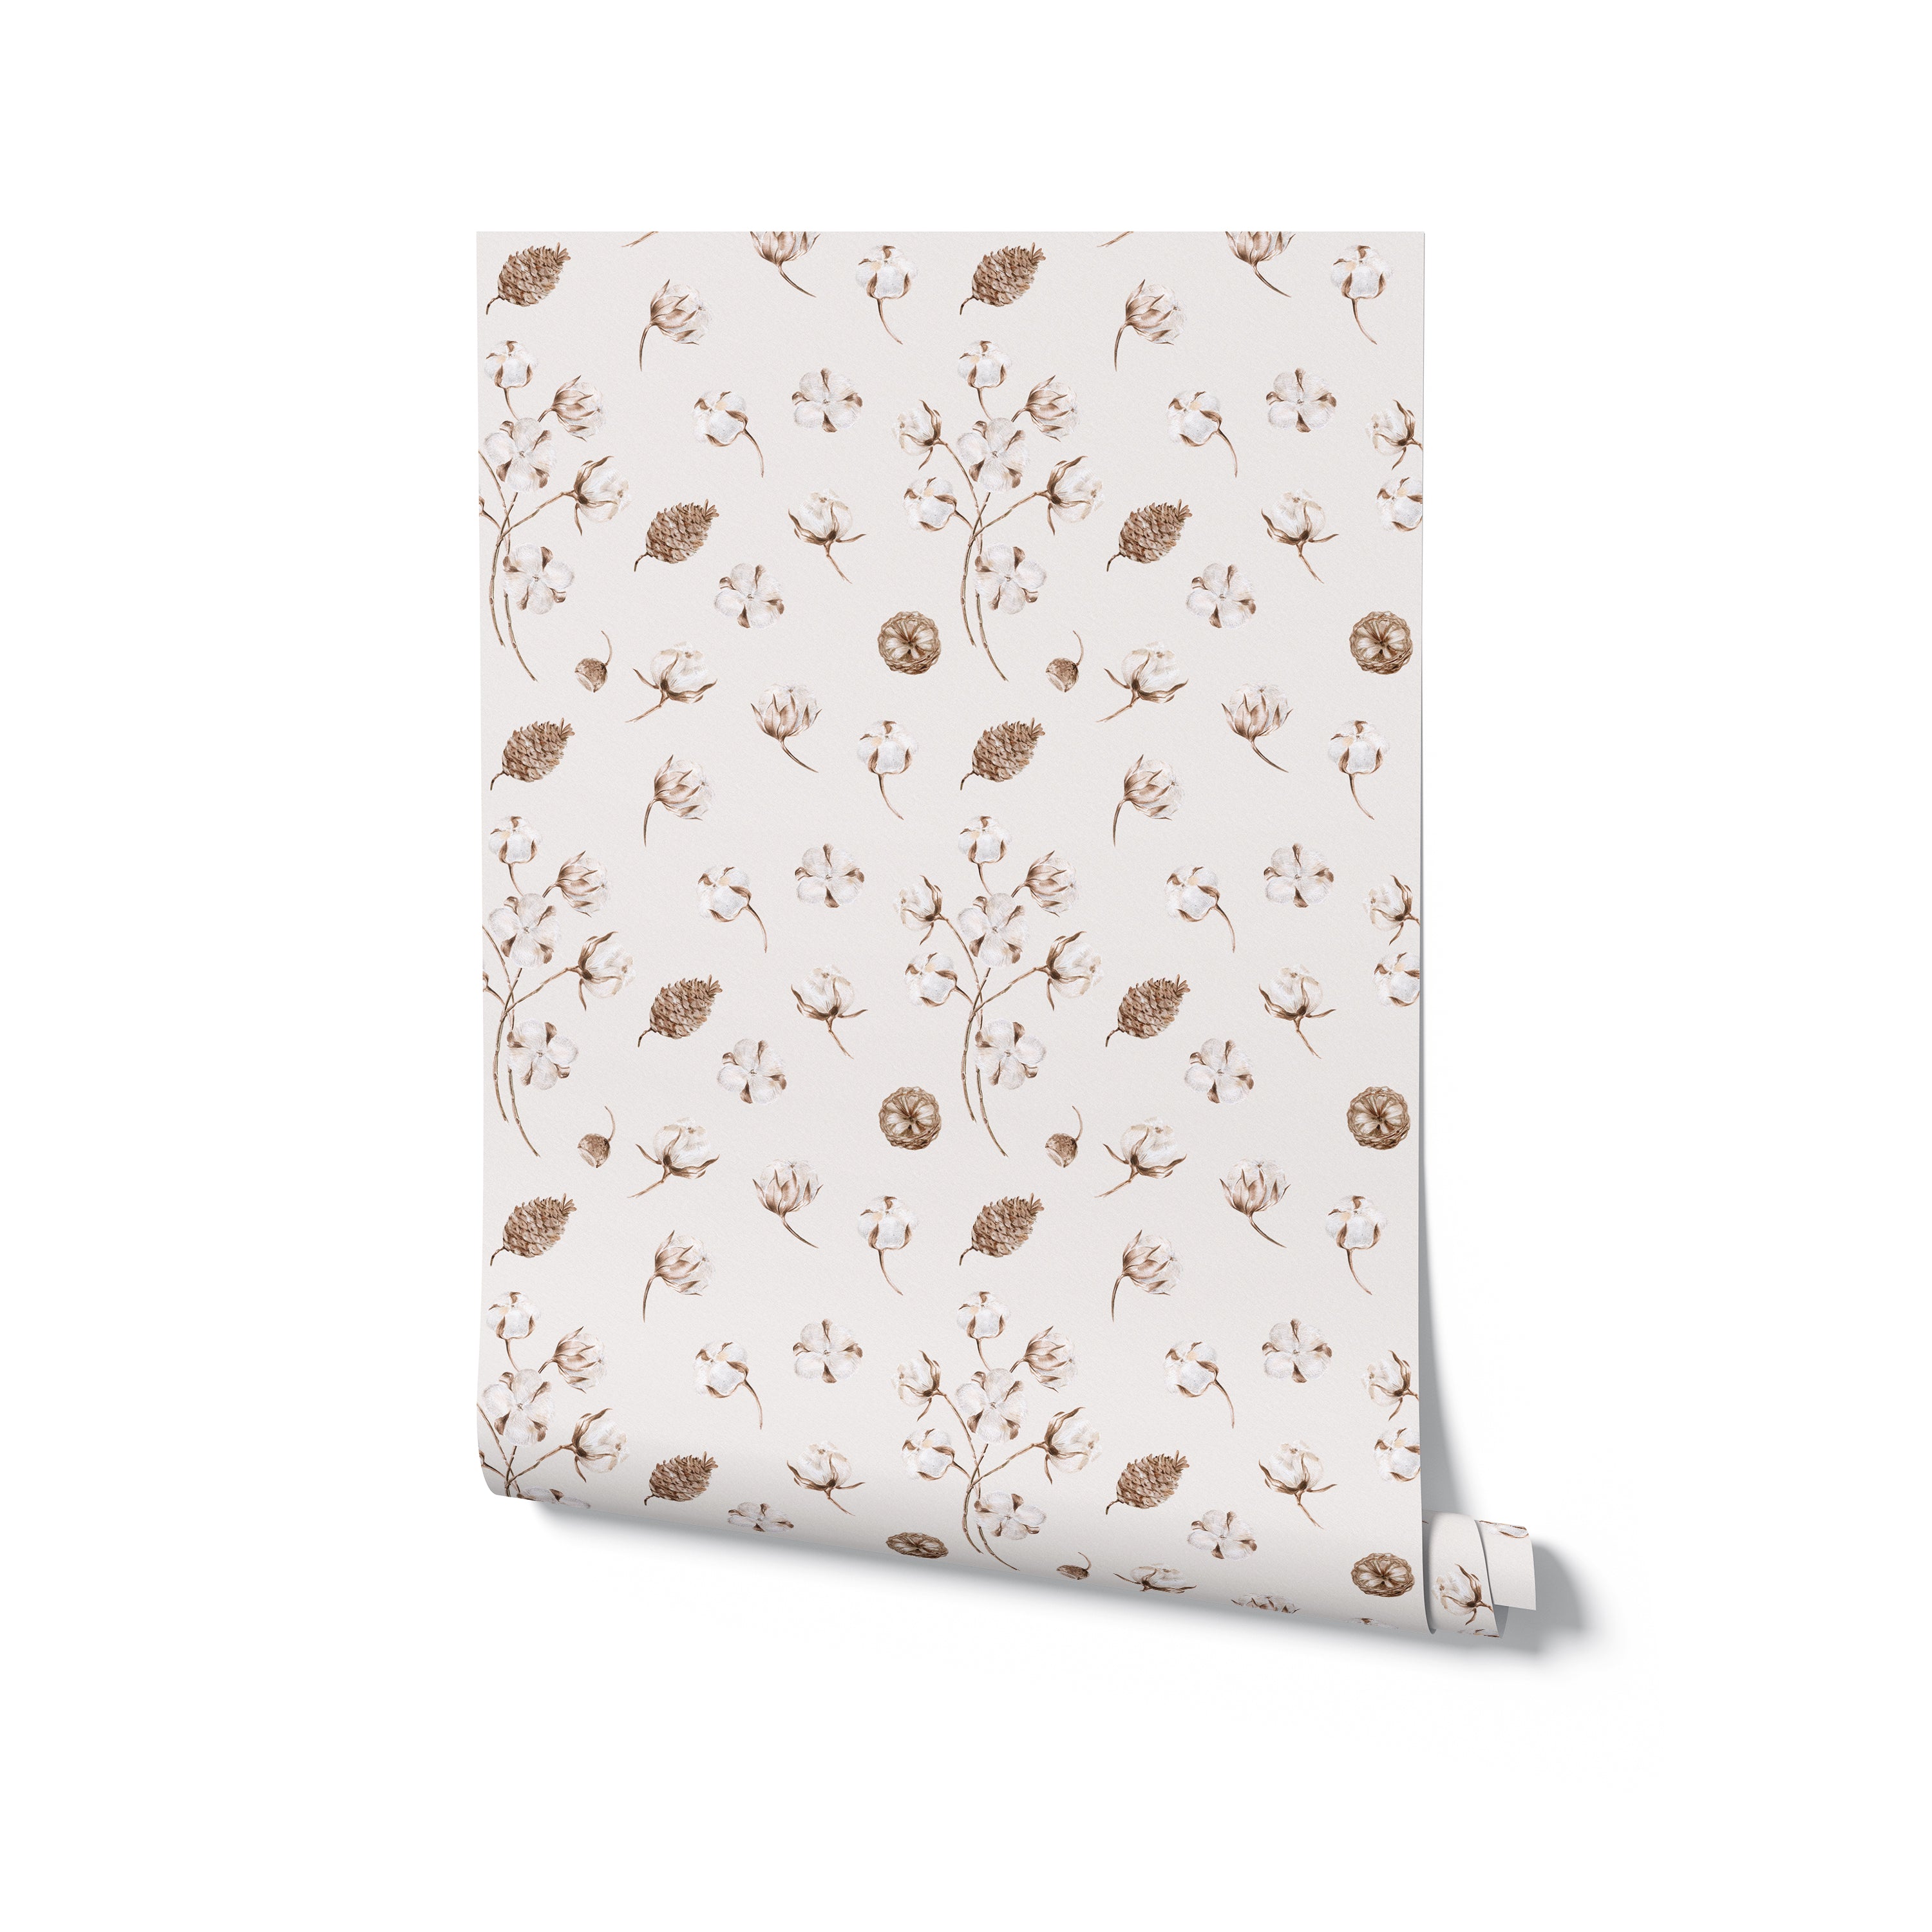 A roll of Winter Boho Wallpaper featuring an elegant botanical design with elements like cotton bolls and small branches in soft beige and brown tones on a white background. This wallpaper is ideal for adding a serene, rustic touch to any interior space.